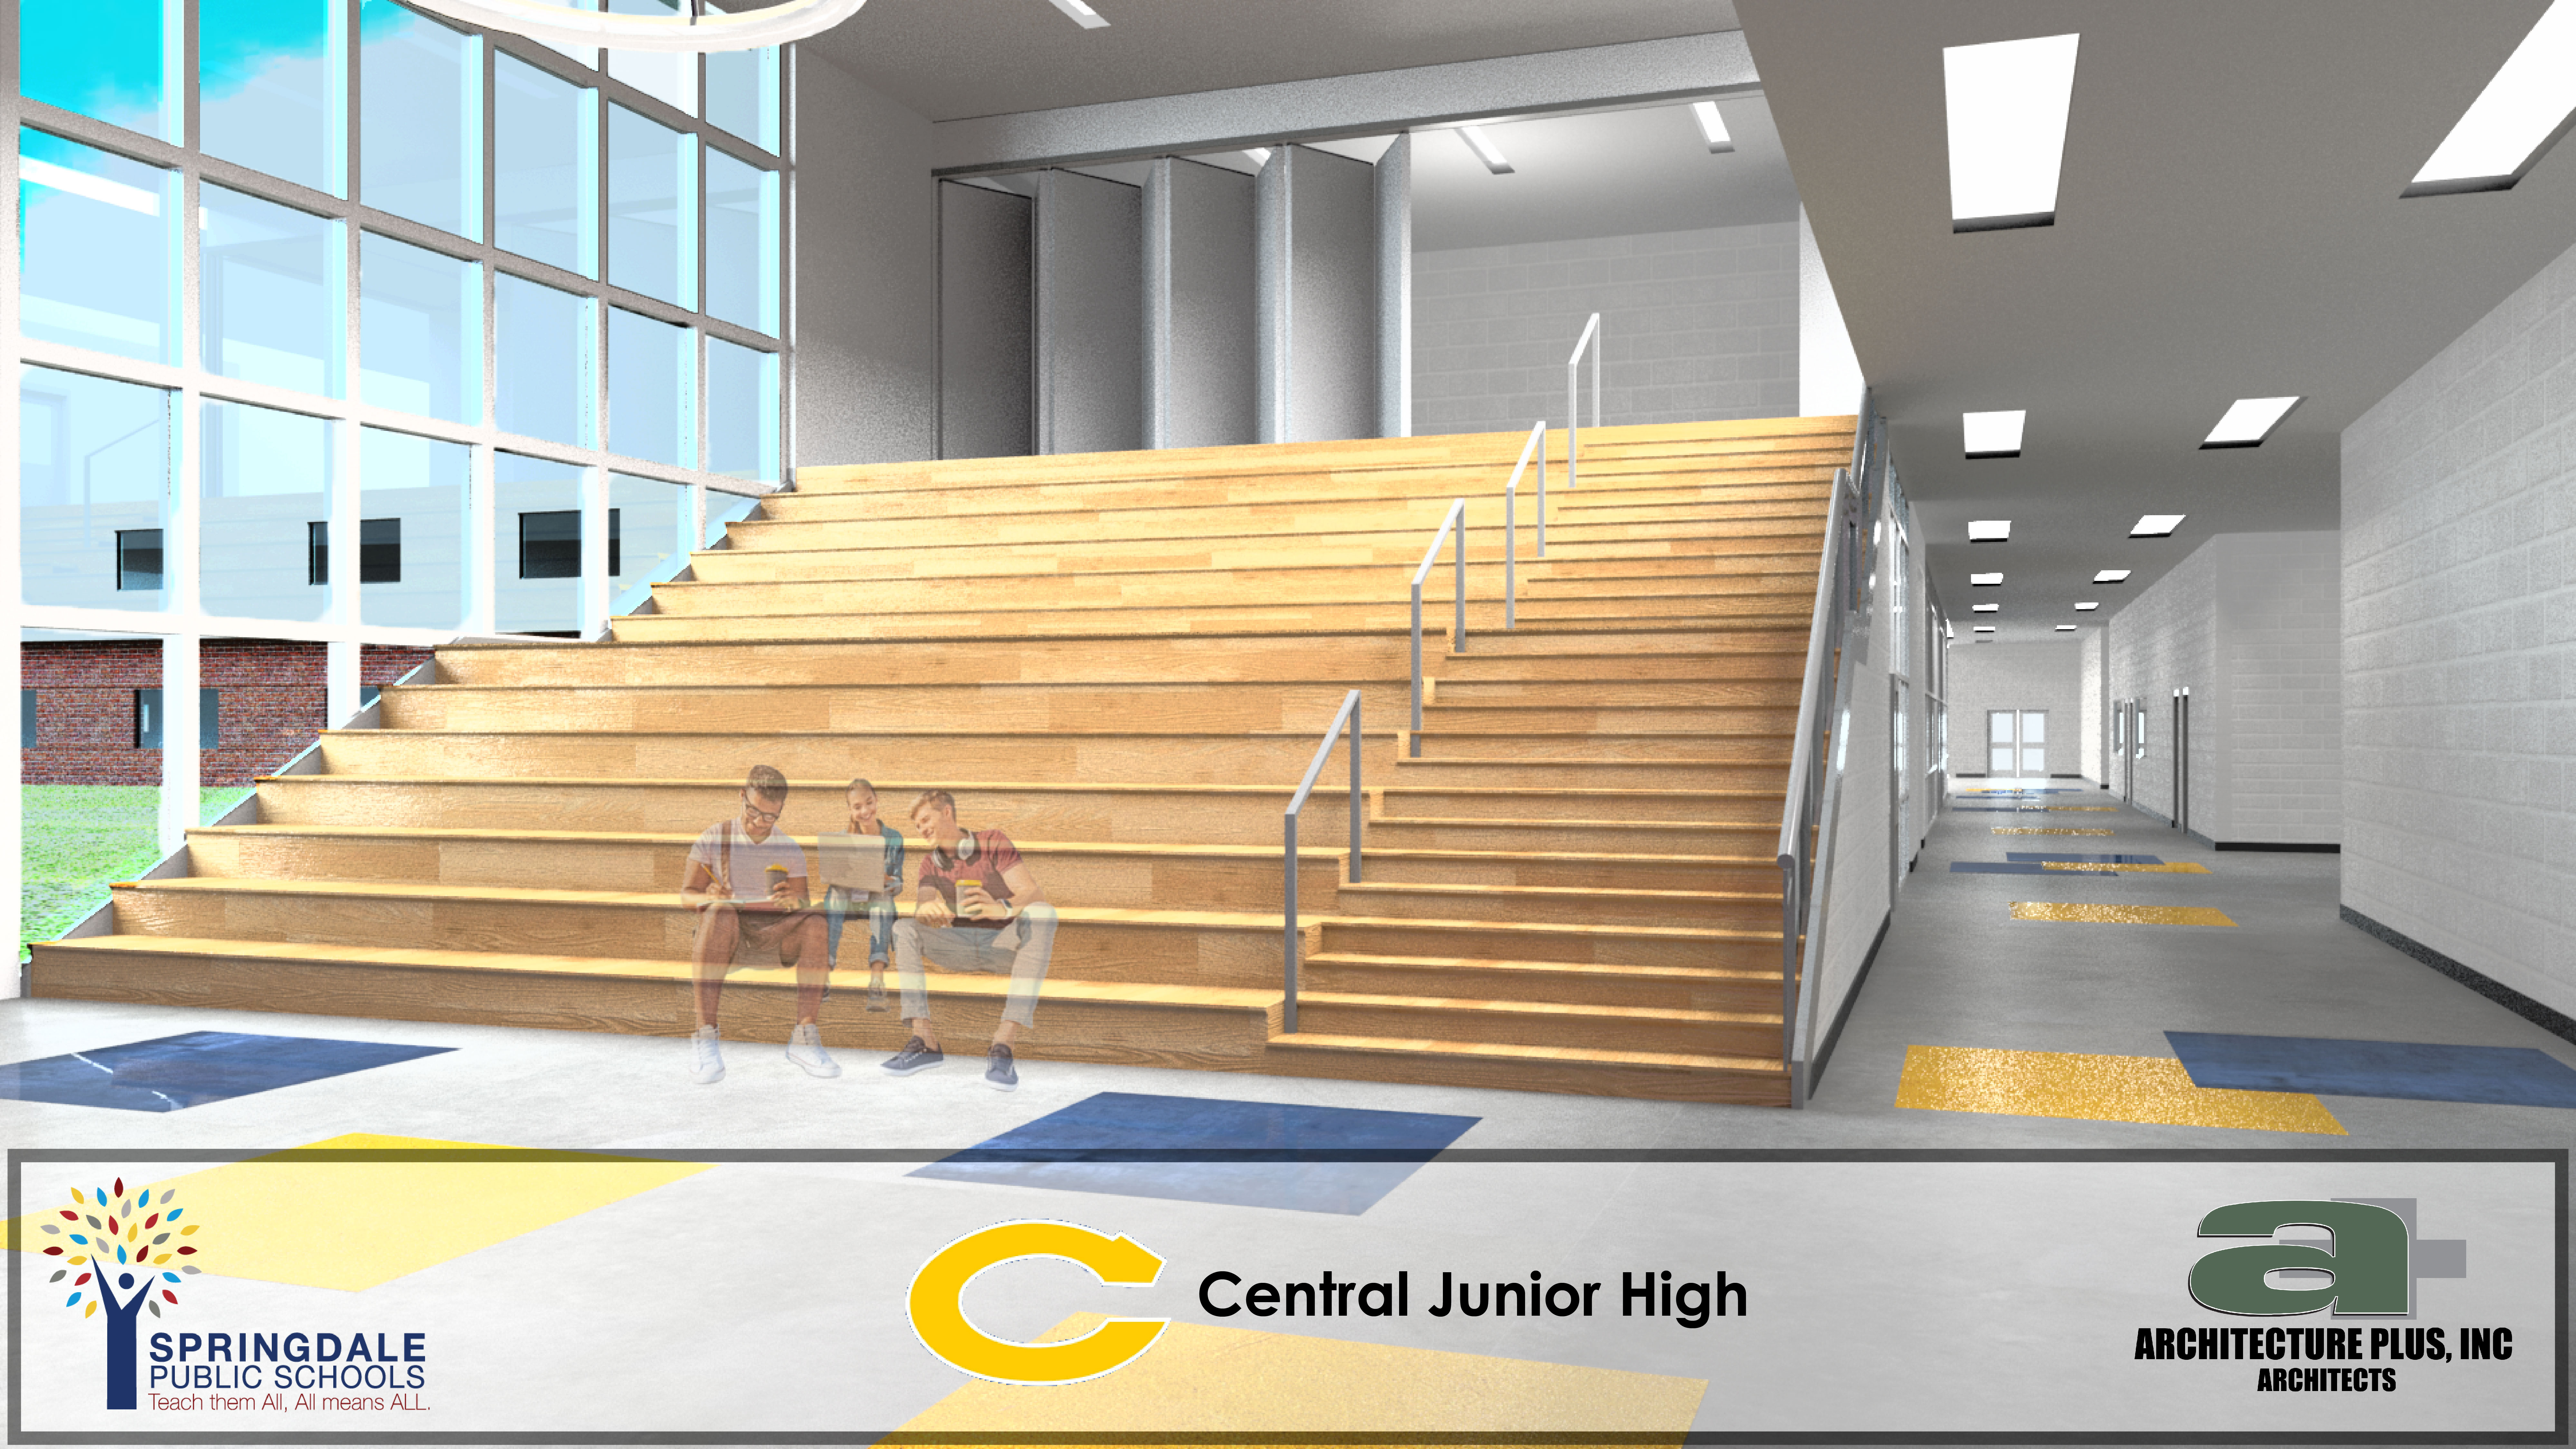 Computer Image of the inside of Central Junior High